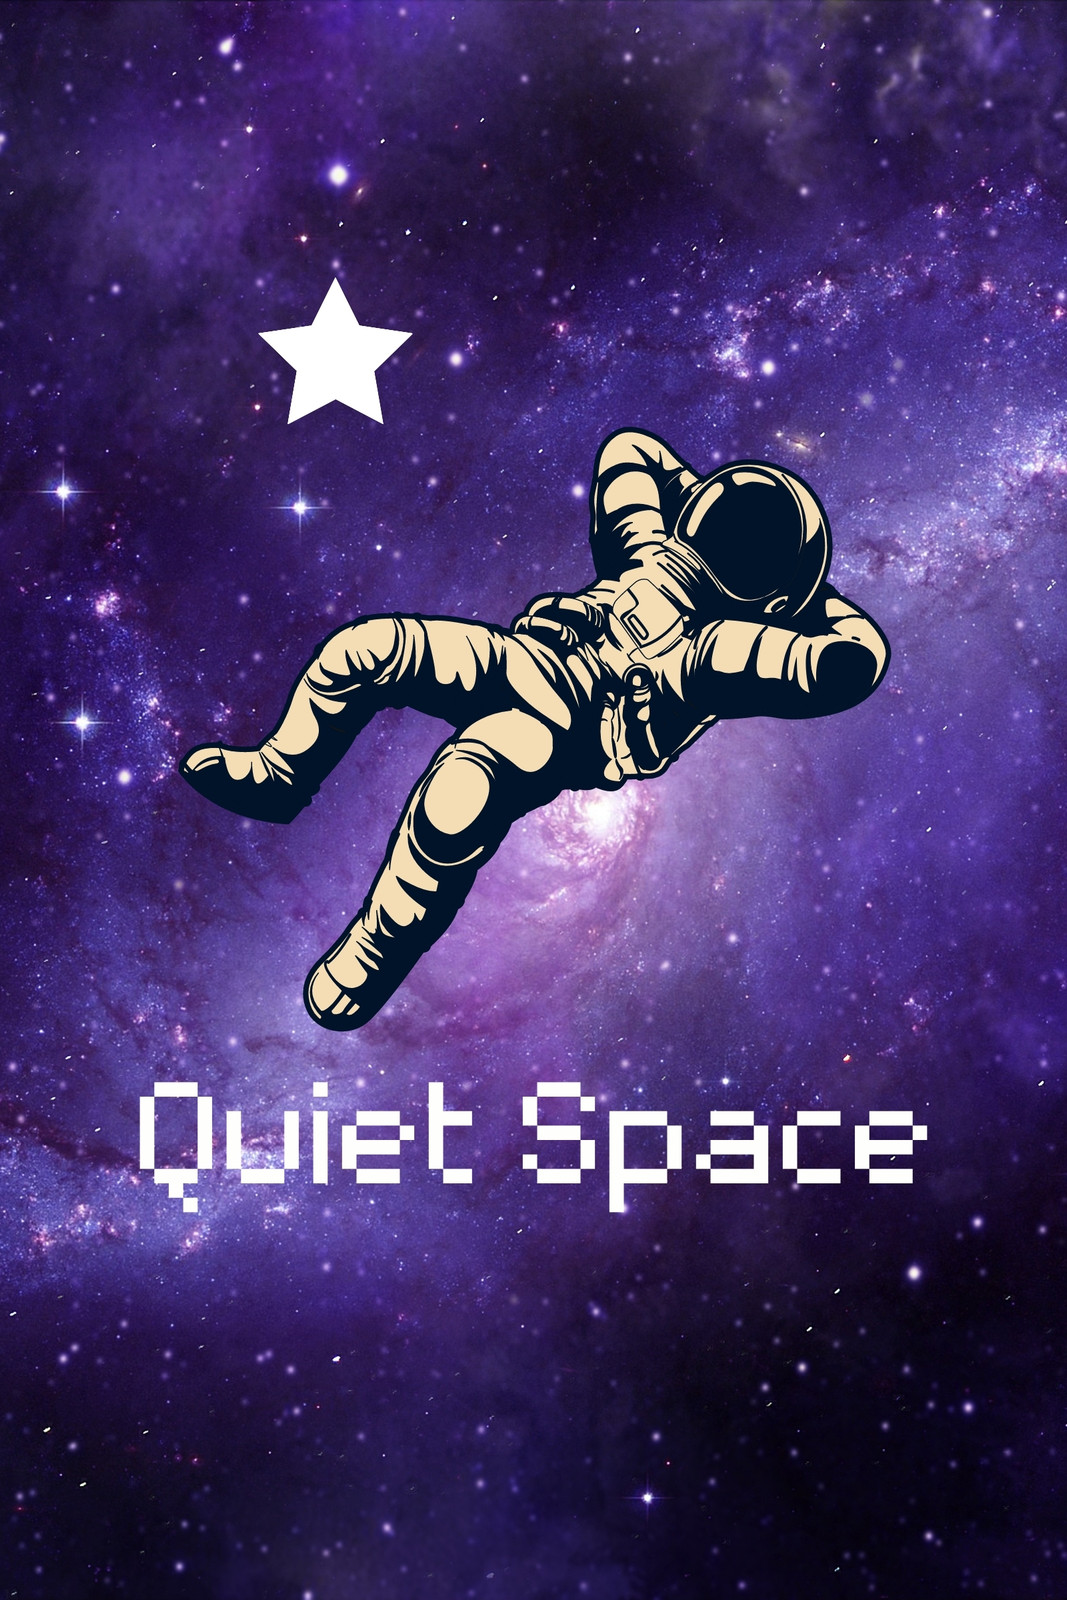 Page 3 - Free and customizable space templates